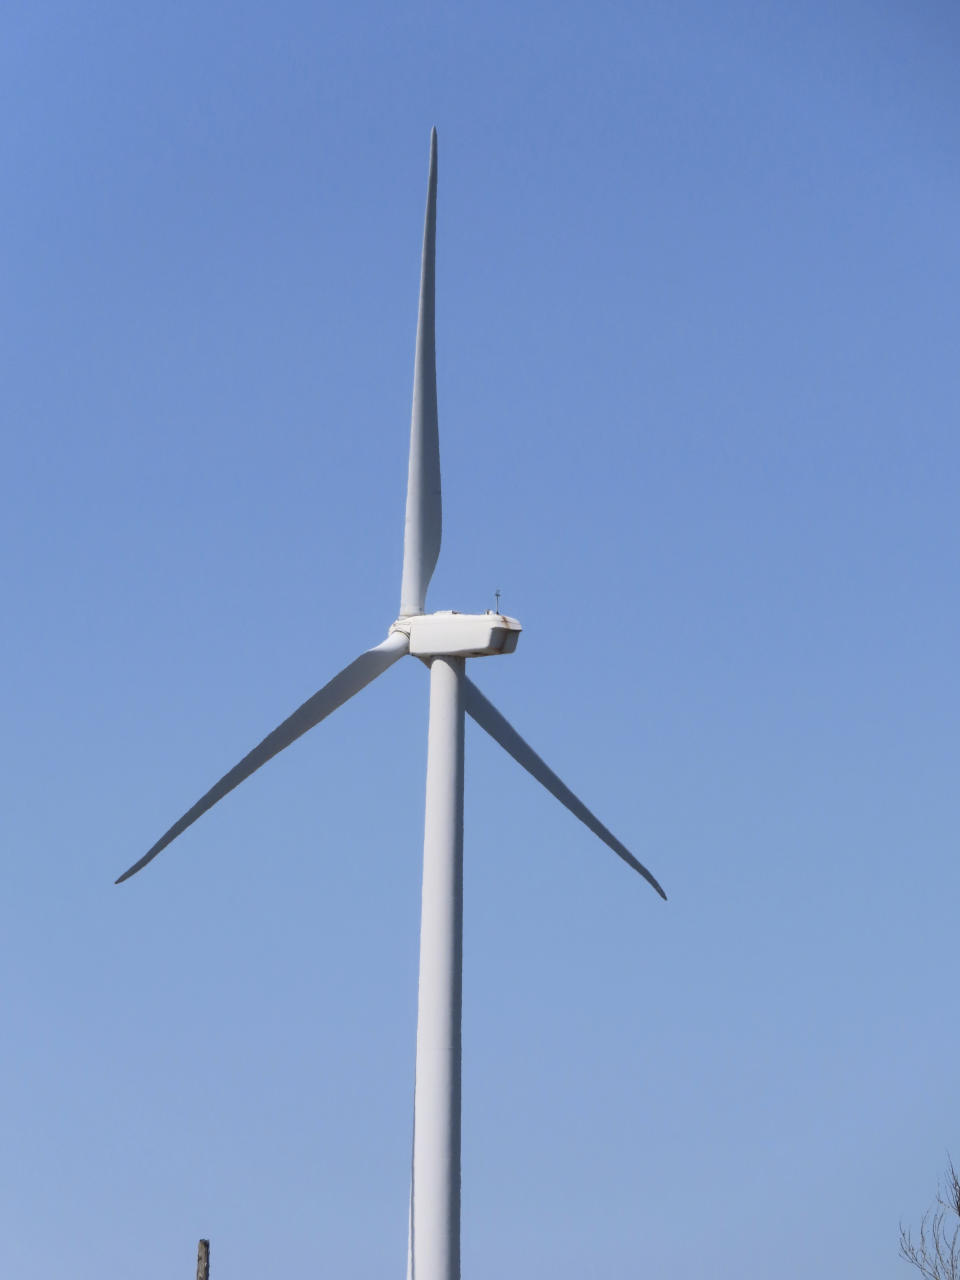 A land-based wind turbine spins in Atlantic City, N.J. on April 28, 2022. On July 11, 2024, Community Offshore Wind identified itself as the third company to submit plans for an offshore wind farm in New Jersey by the previous day's deadline. (AP Photo/Wayne Parry)